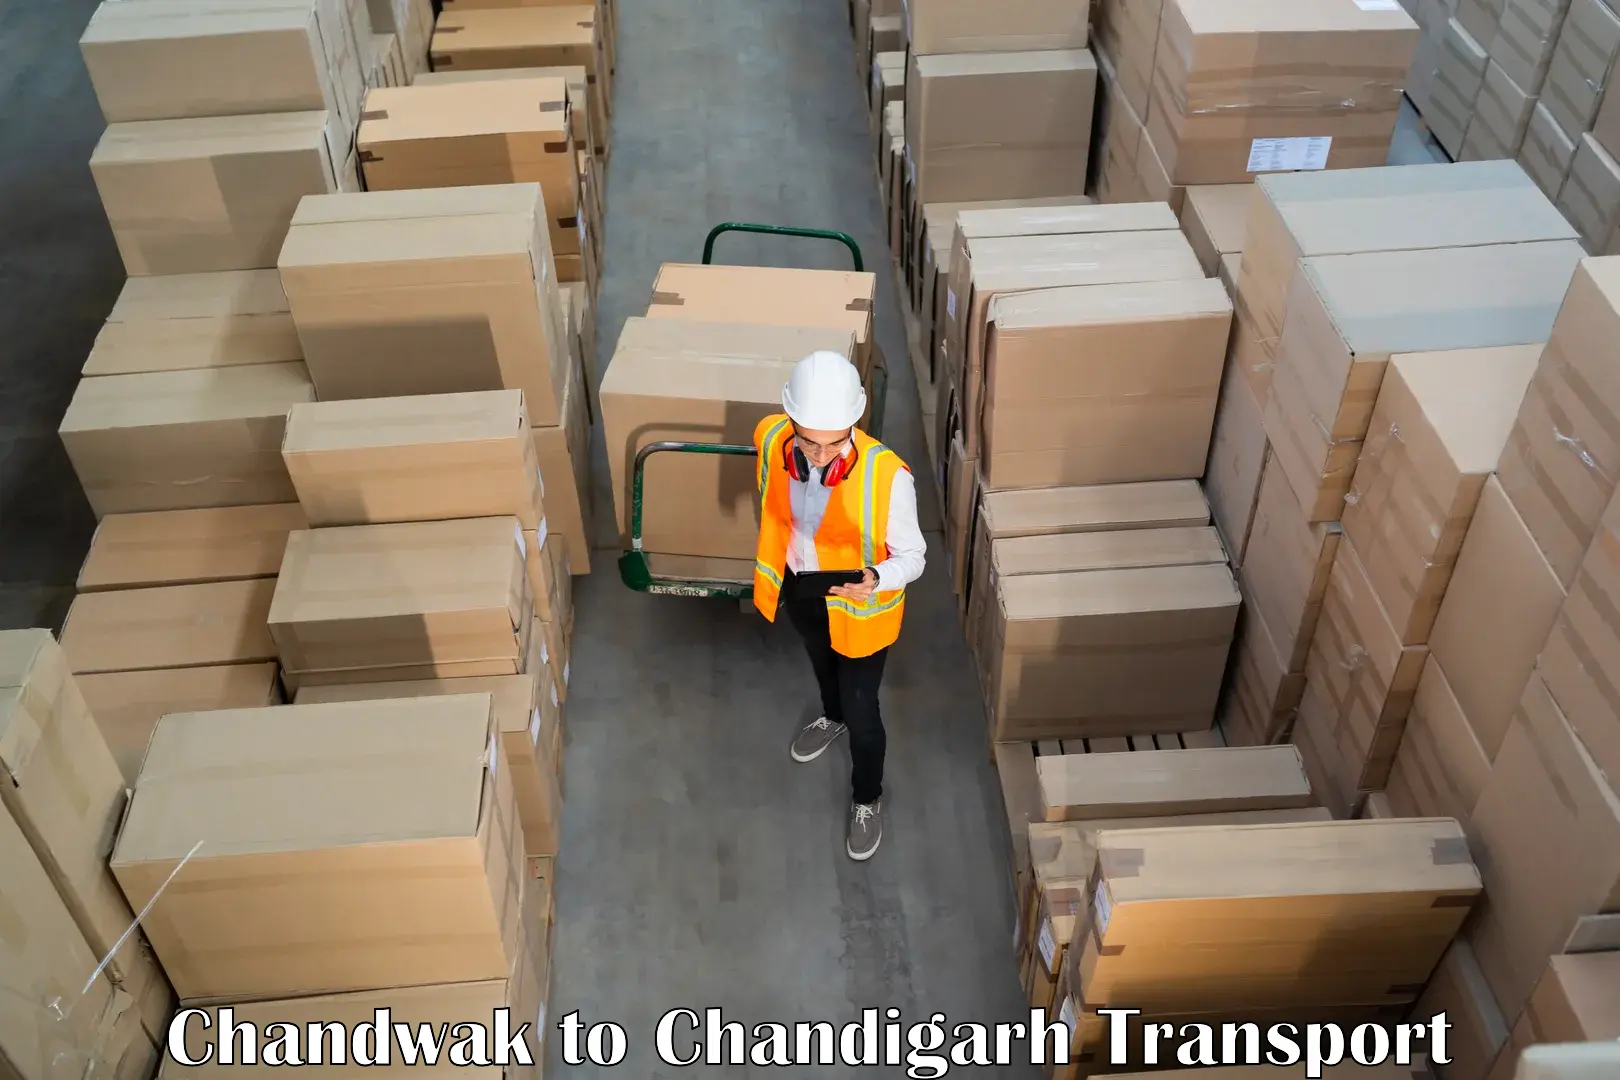 Daily parcel service transport Chandwak to Chandigarh